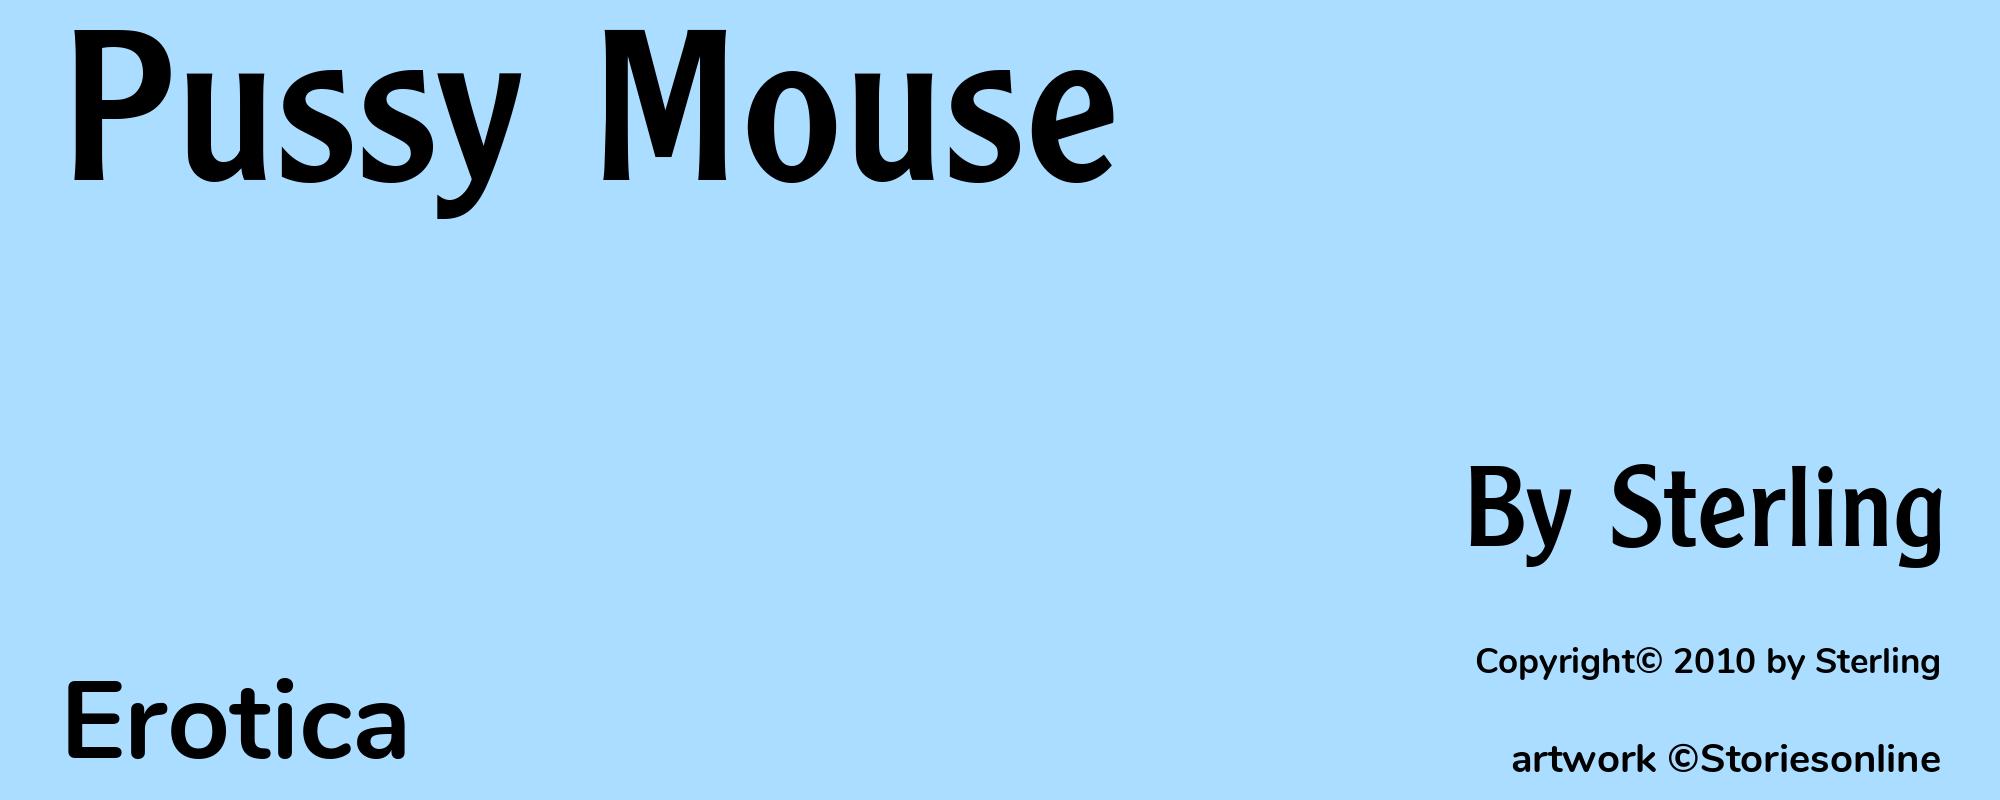 Pussy Mouse - Cover